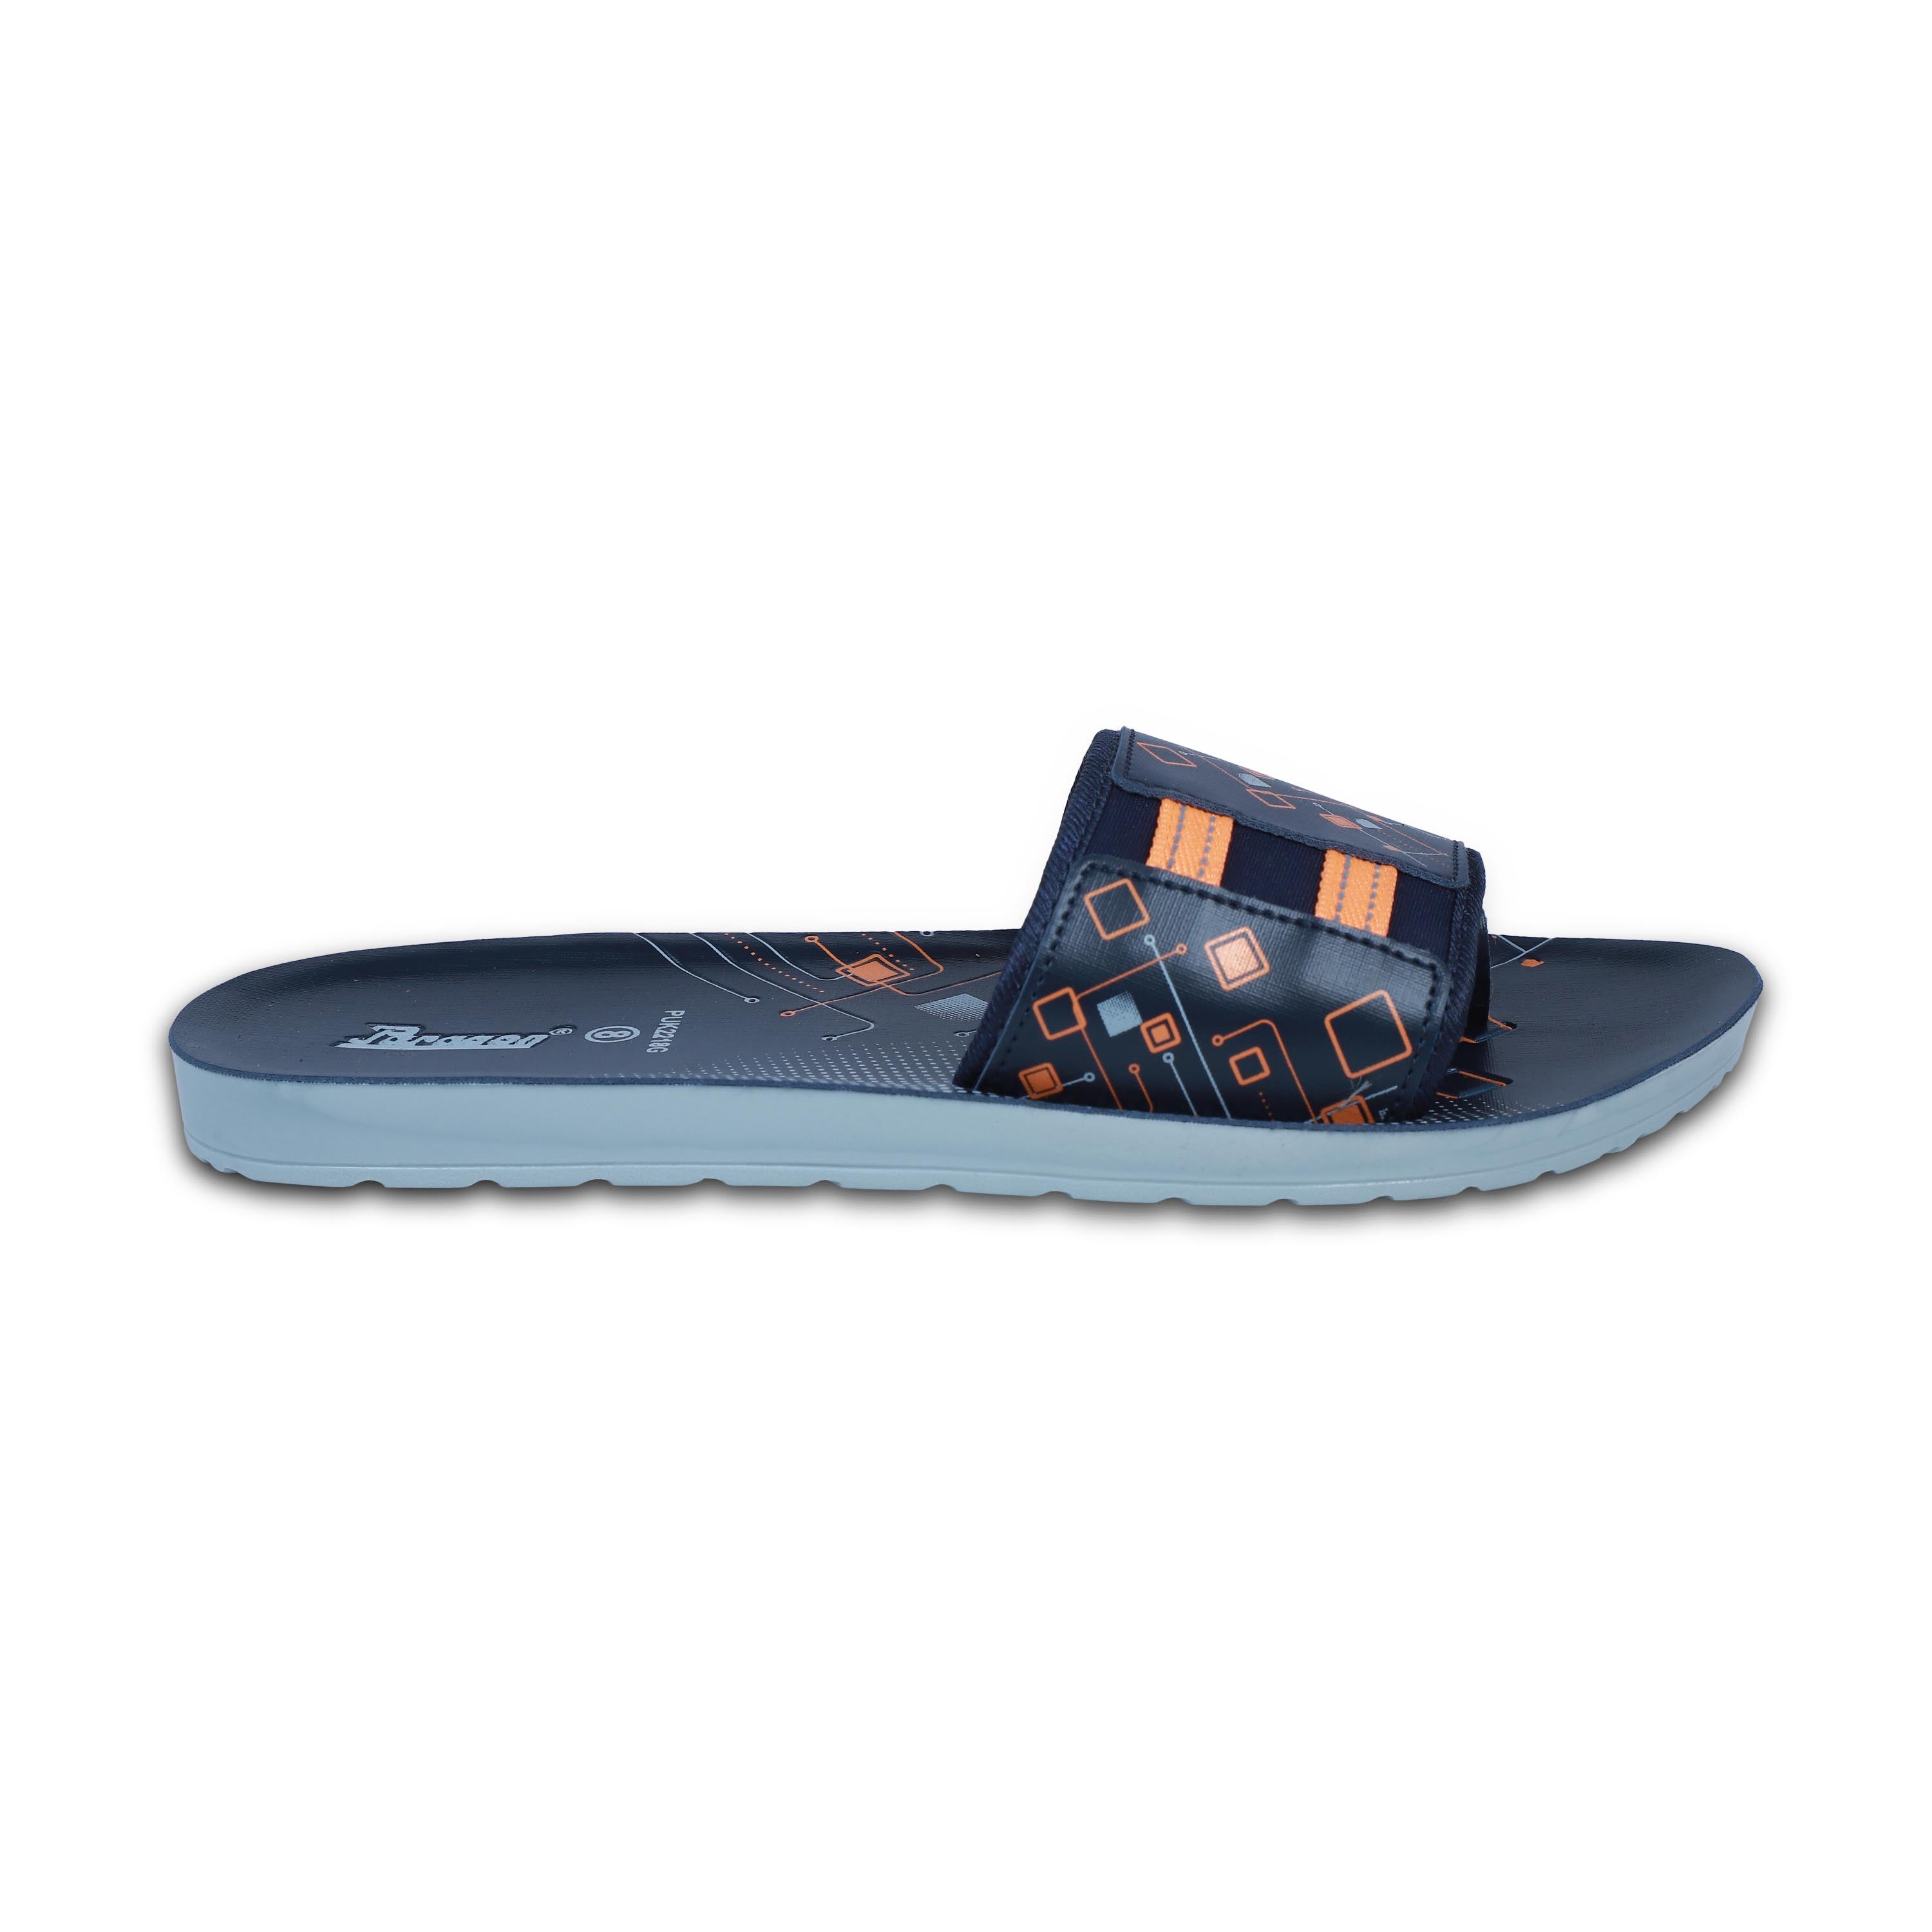 Paragon  PUK2218G Men Casual Sliders | Stylish Trendy Lightweight Slides | Casual &amp; Comfortable Slippers | For Everyday Use